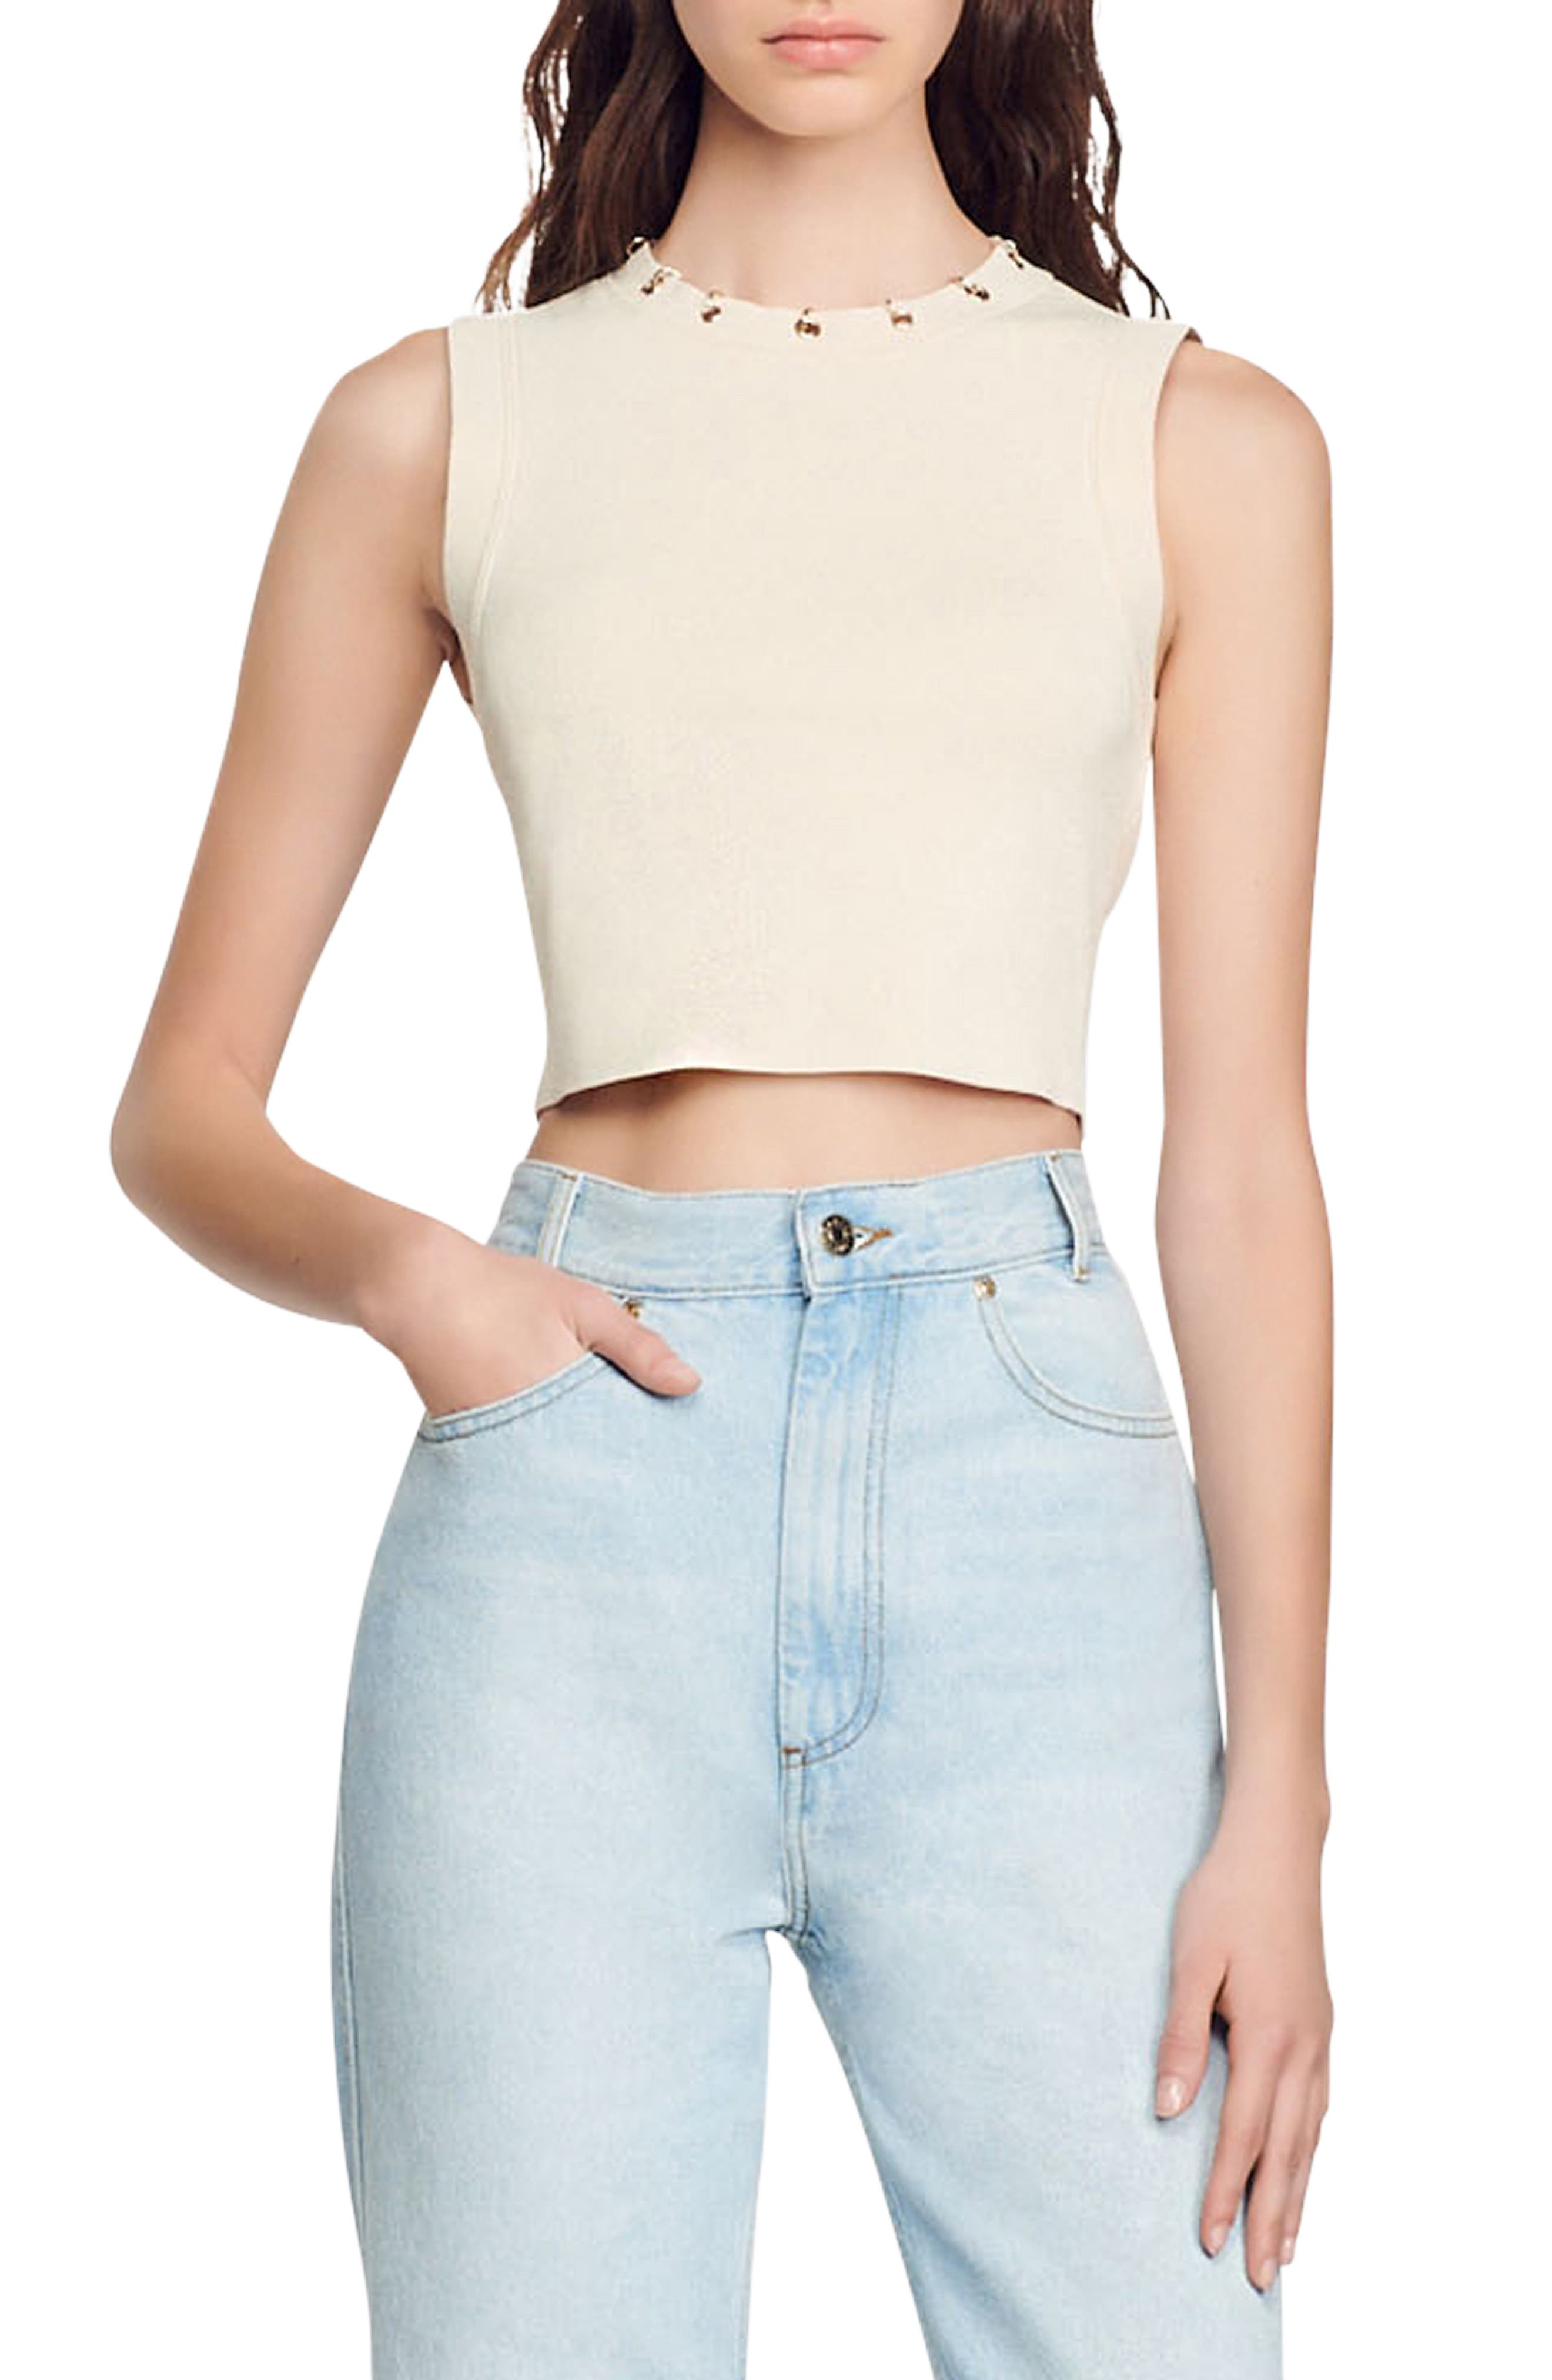 WHITE CROPPED JUMPER Ribbed V Neck Collar Sweater Pullover Crop Top Long Sleeve 